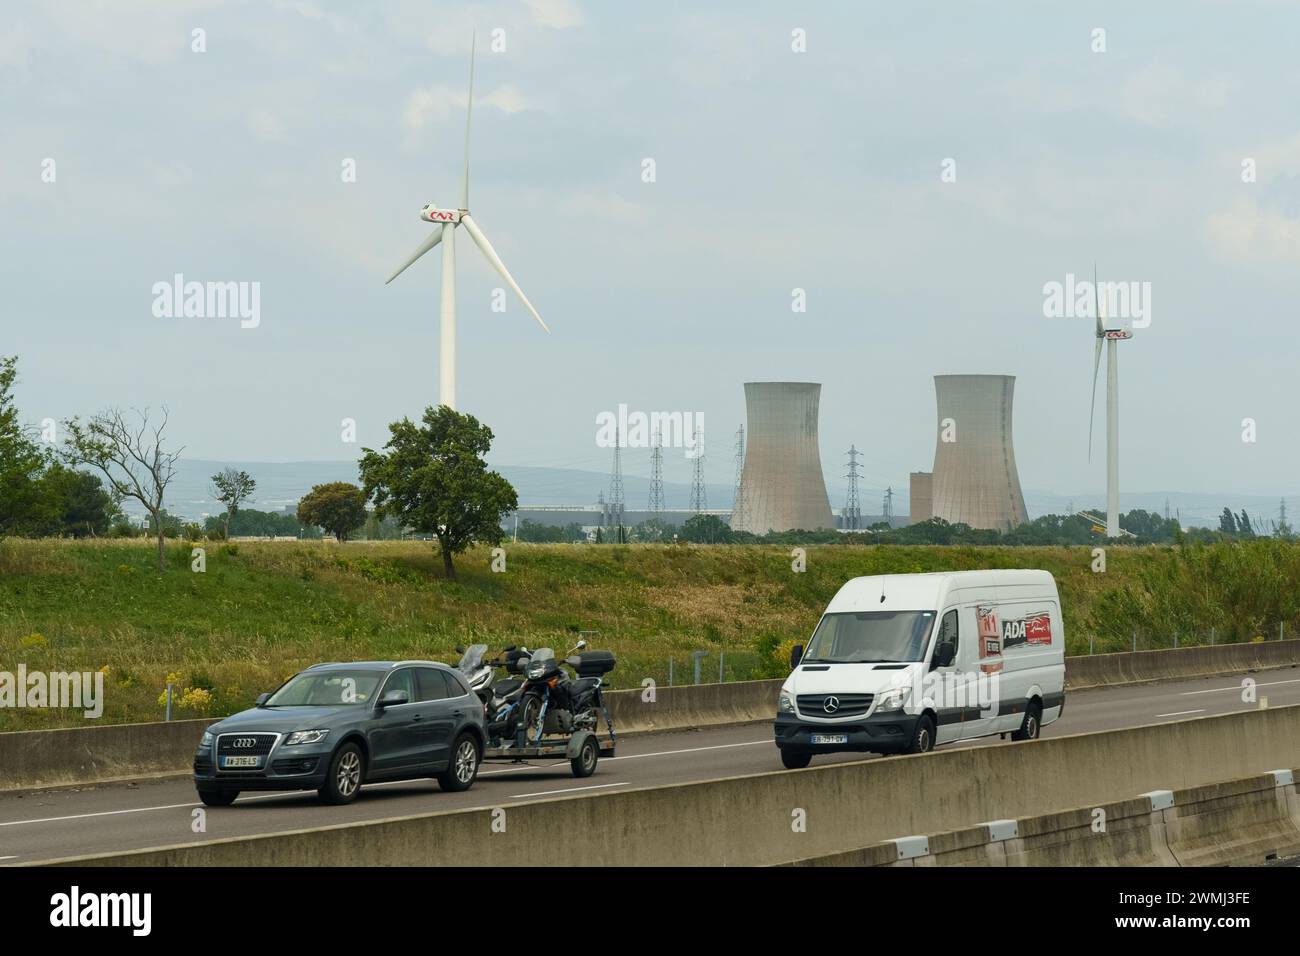 Lyon, France - May 16, 2023:A white van traveling down a highway alongside a massive wind turbine. The van is in motion, passing by the towering turbi Stock Photo